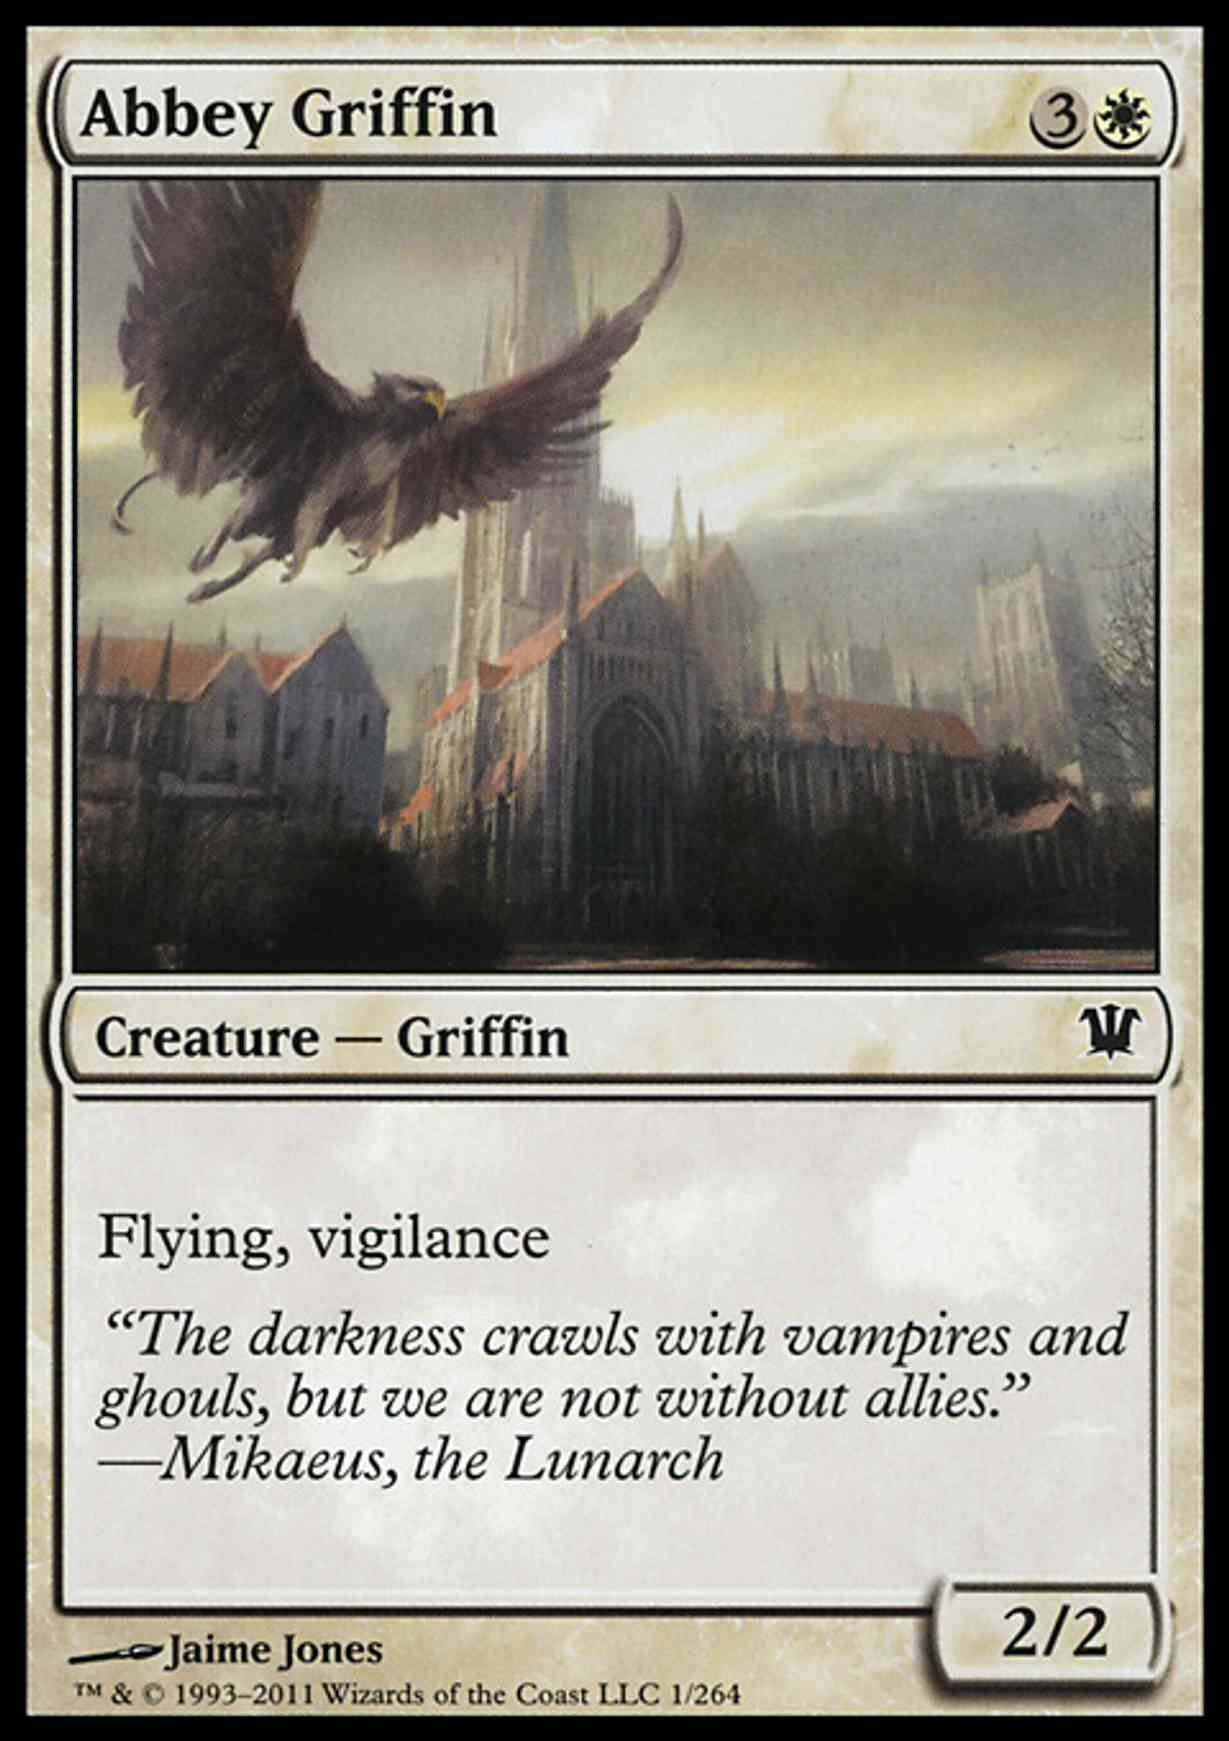 Abbey Griffin magic card front